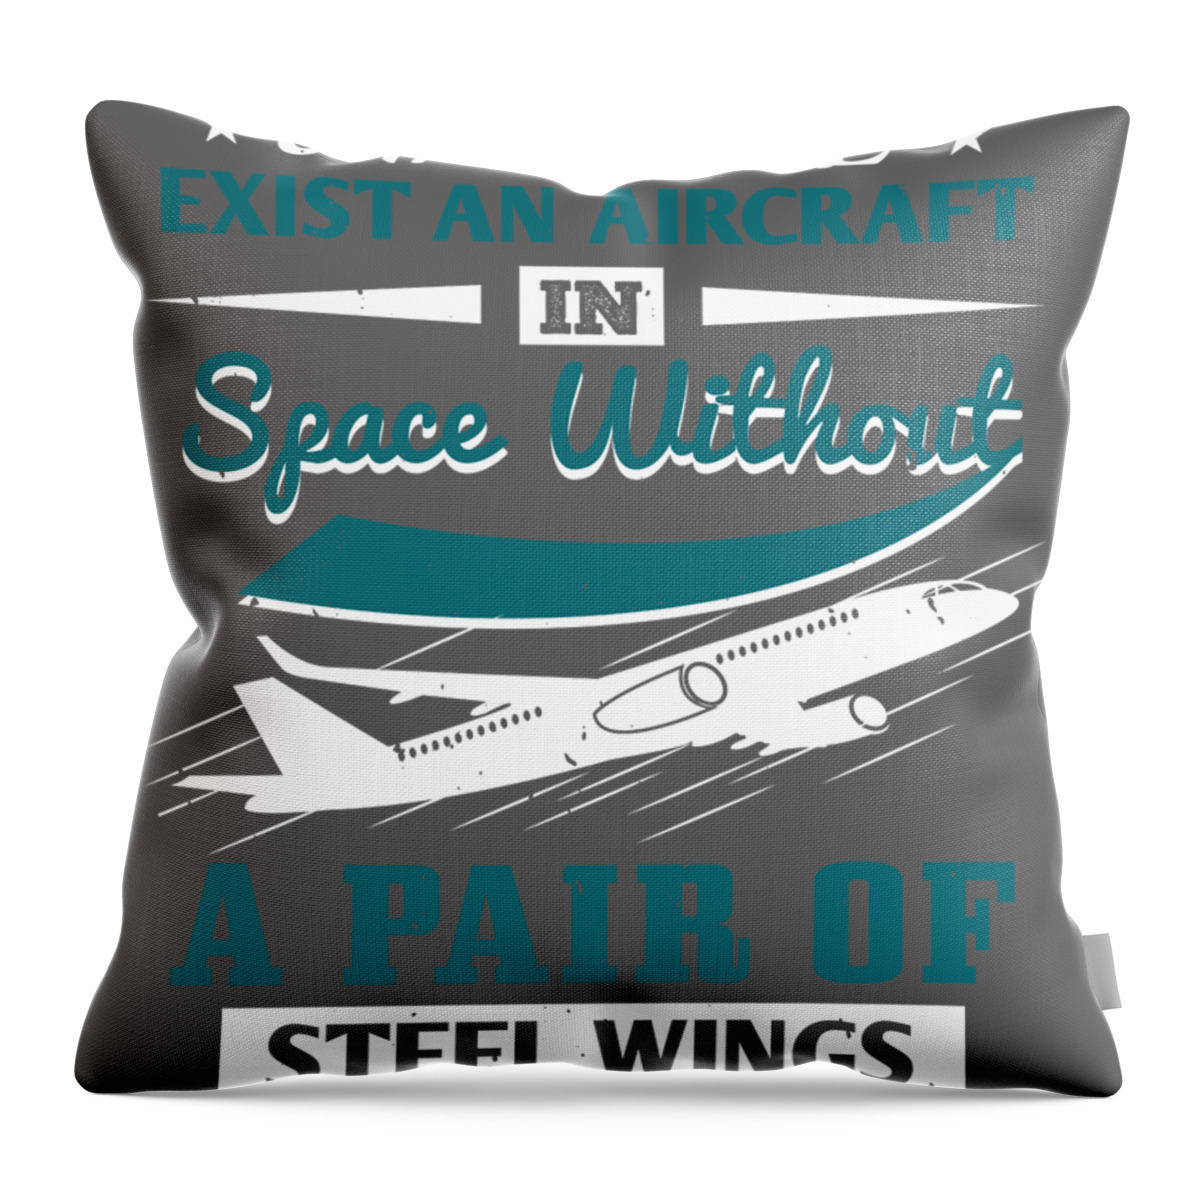 Aviation Throw Pillow featuring the digital art Aviation Gift Can There Exist An Aircraft In Space Without A Pair Of Steel Wings by Jeff Creation